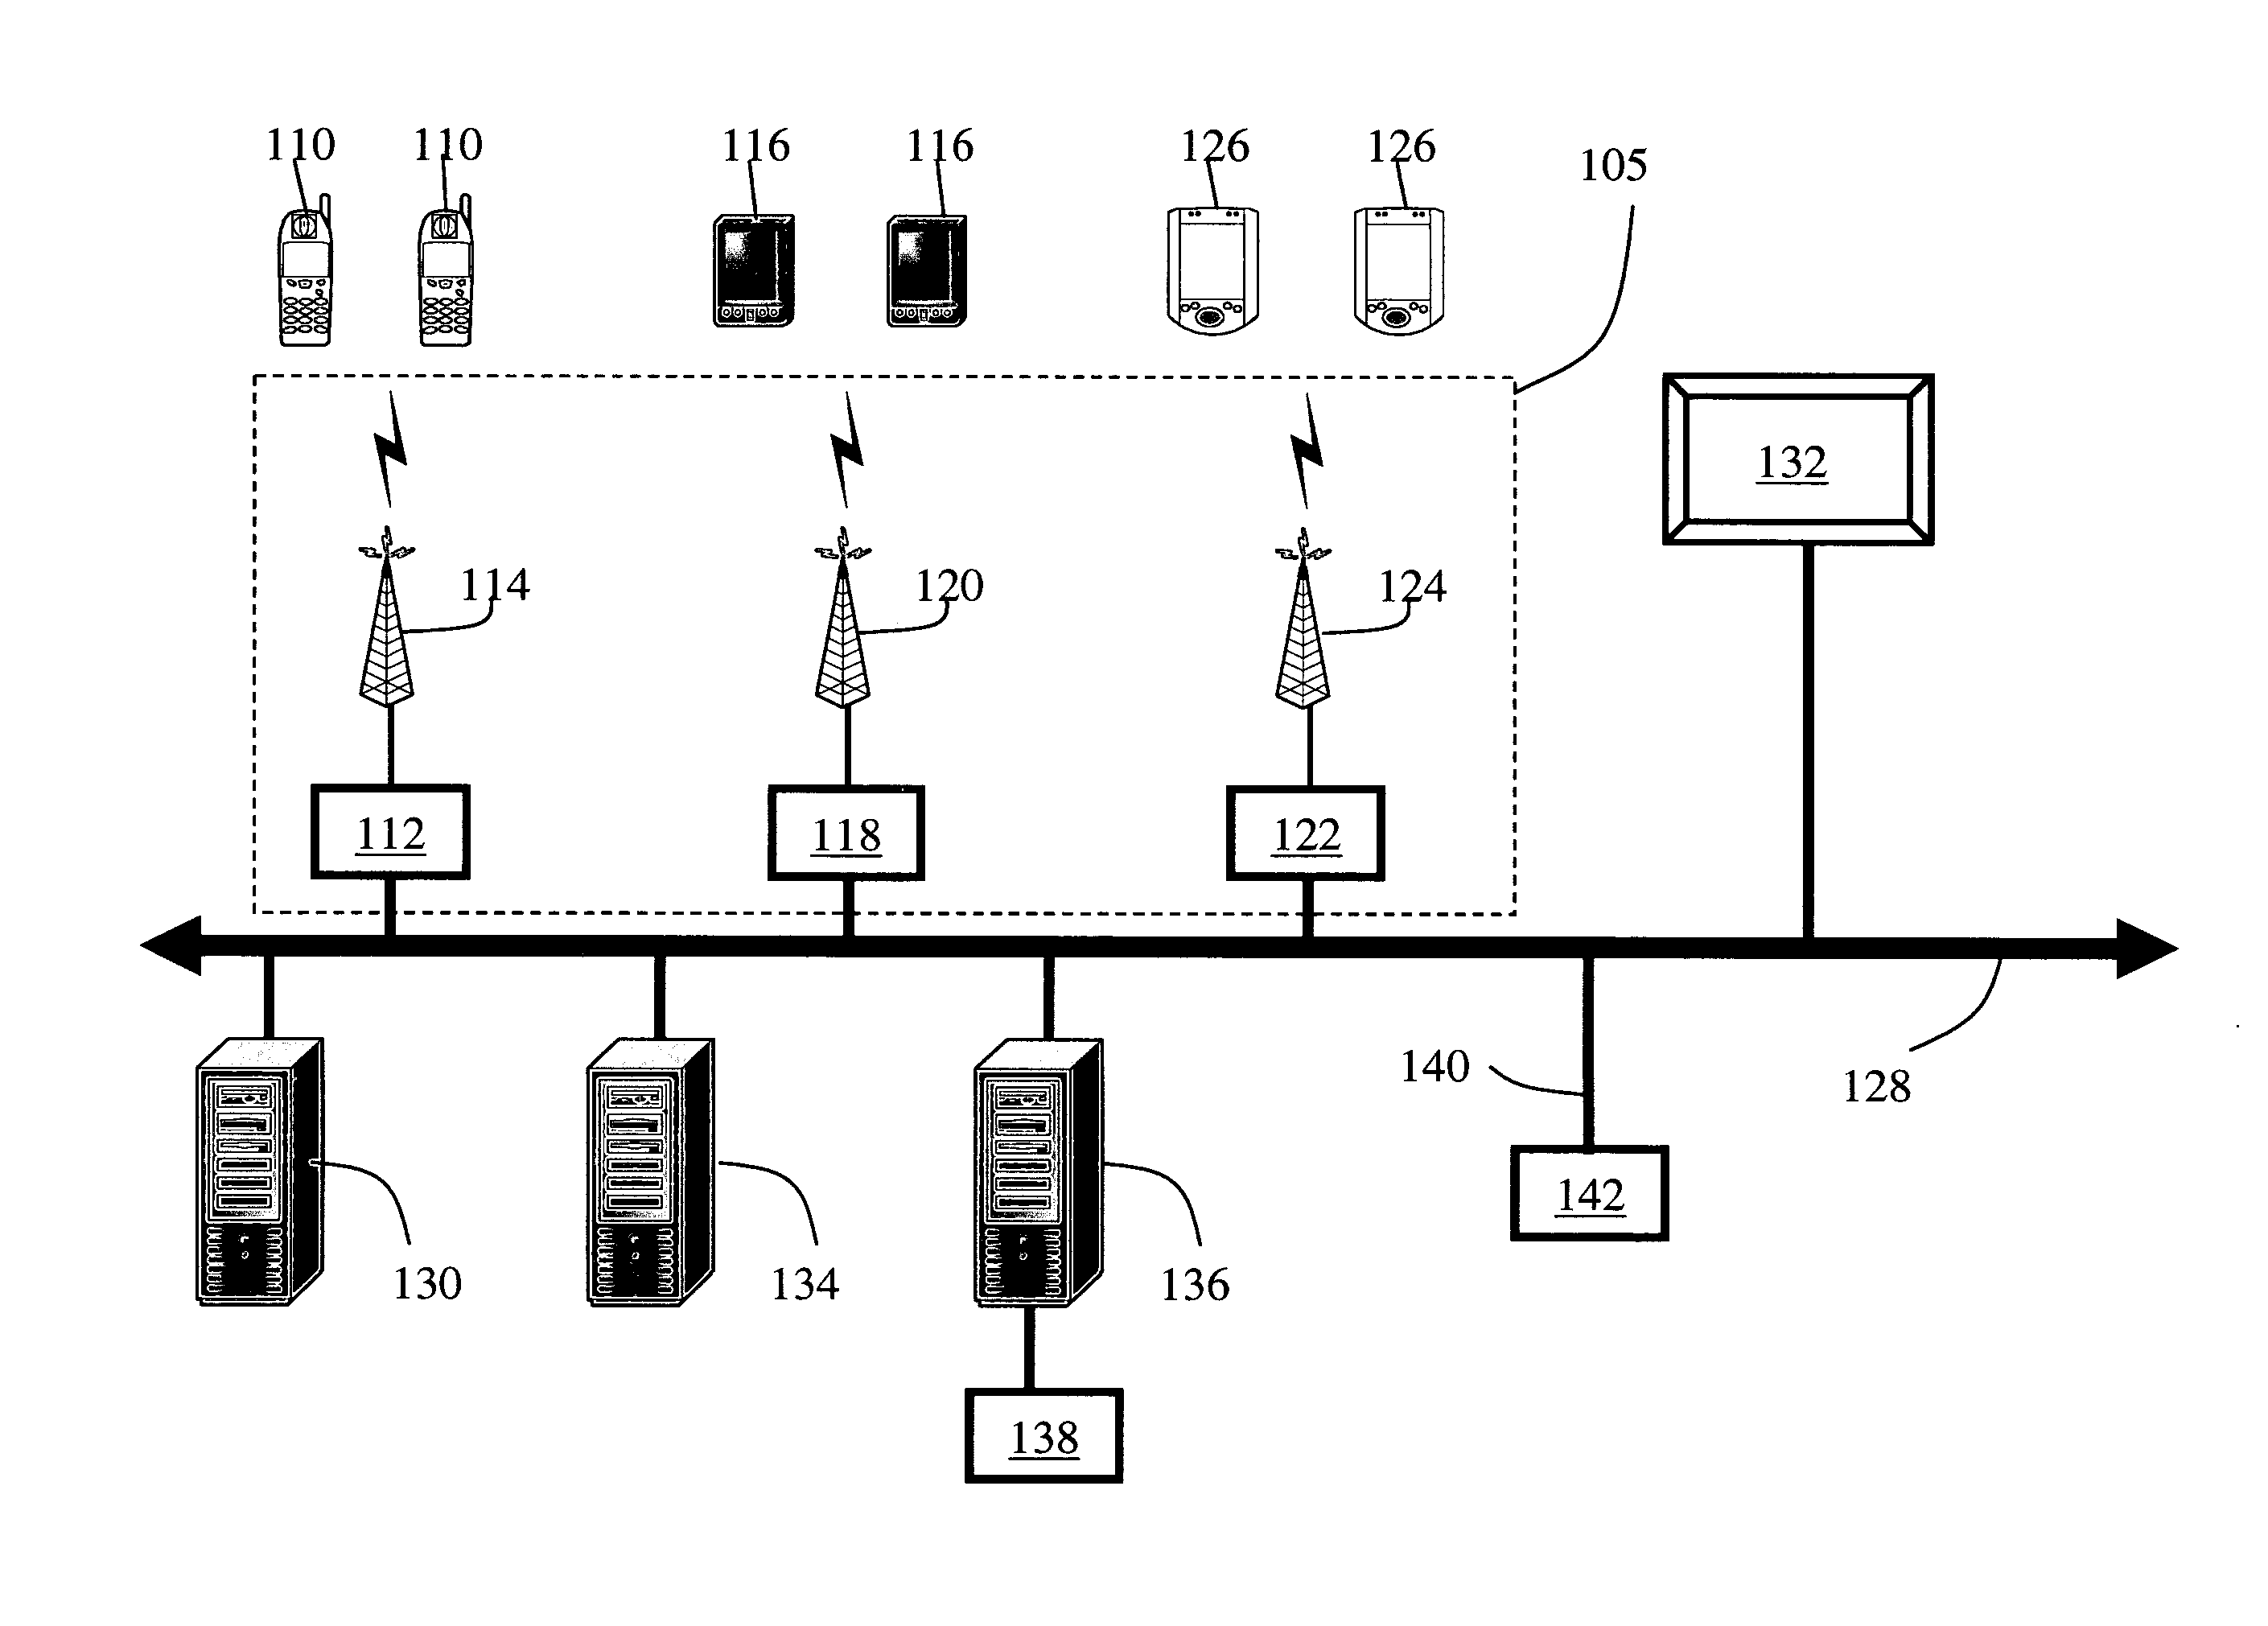 Method and apparatus for interactive participation at a live entertainment event